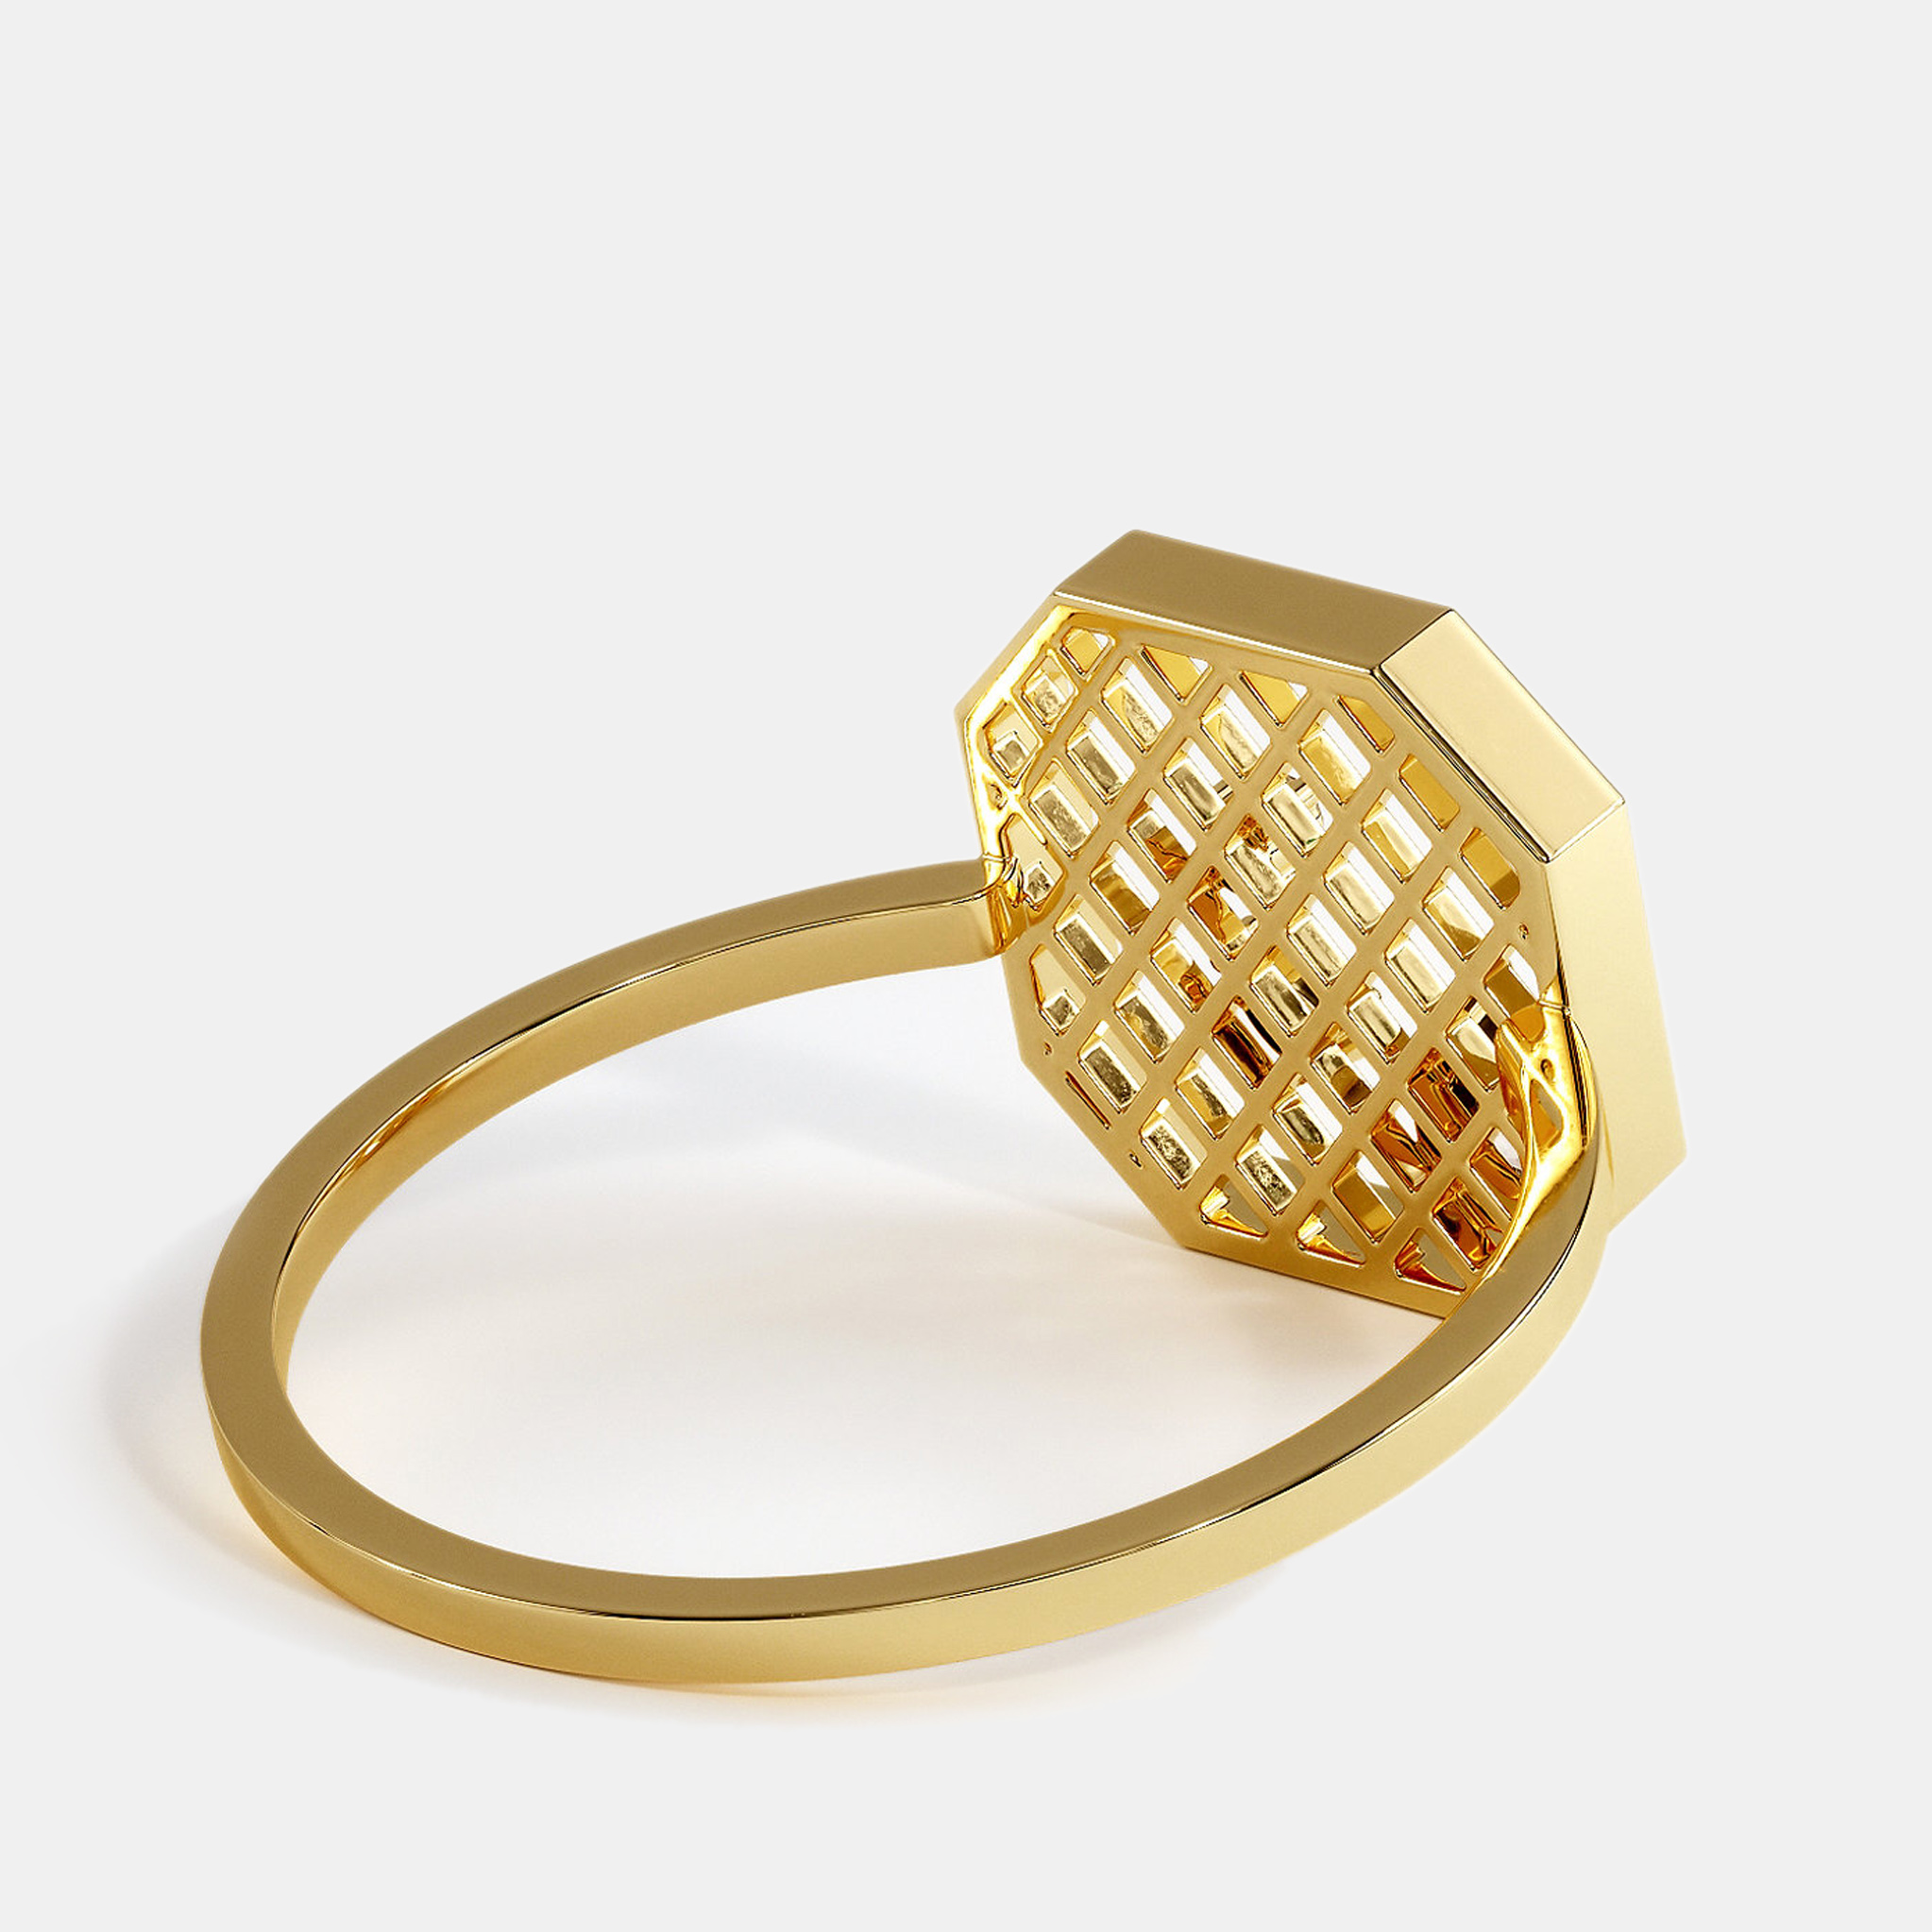 Place Vendome Ring Vendome XII 0.19 Carat Yellow Gold Size 52